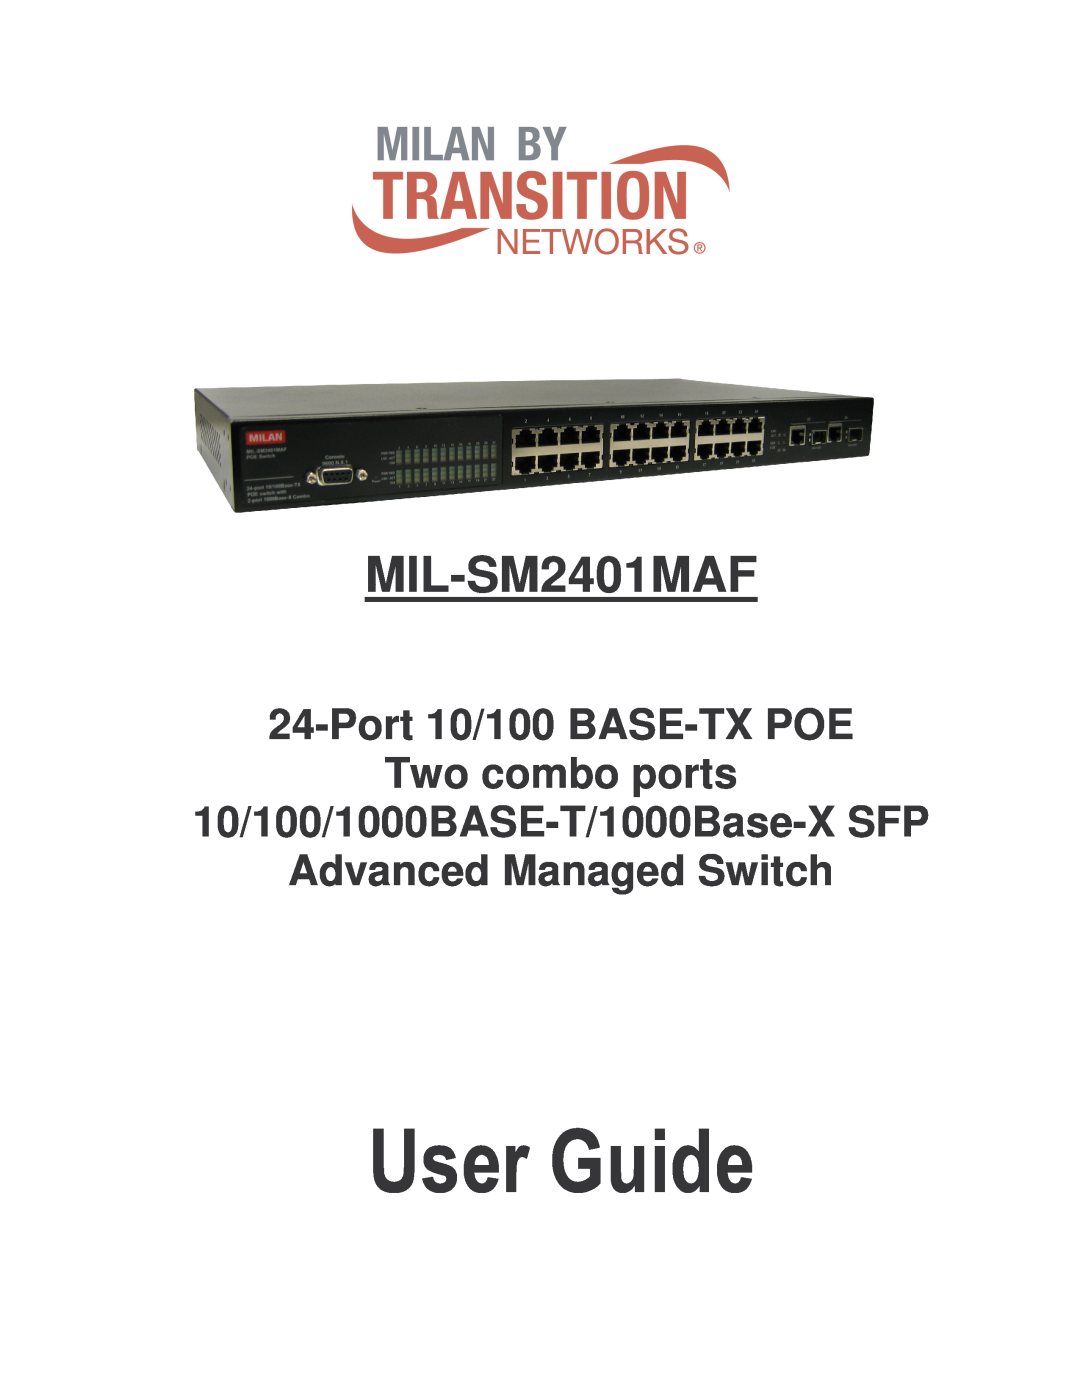 Transition Networks MIL-SM2401MAF manual Port 10/100 BASE-TX POE Two combo ports, User Guide 